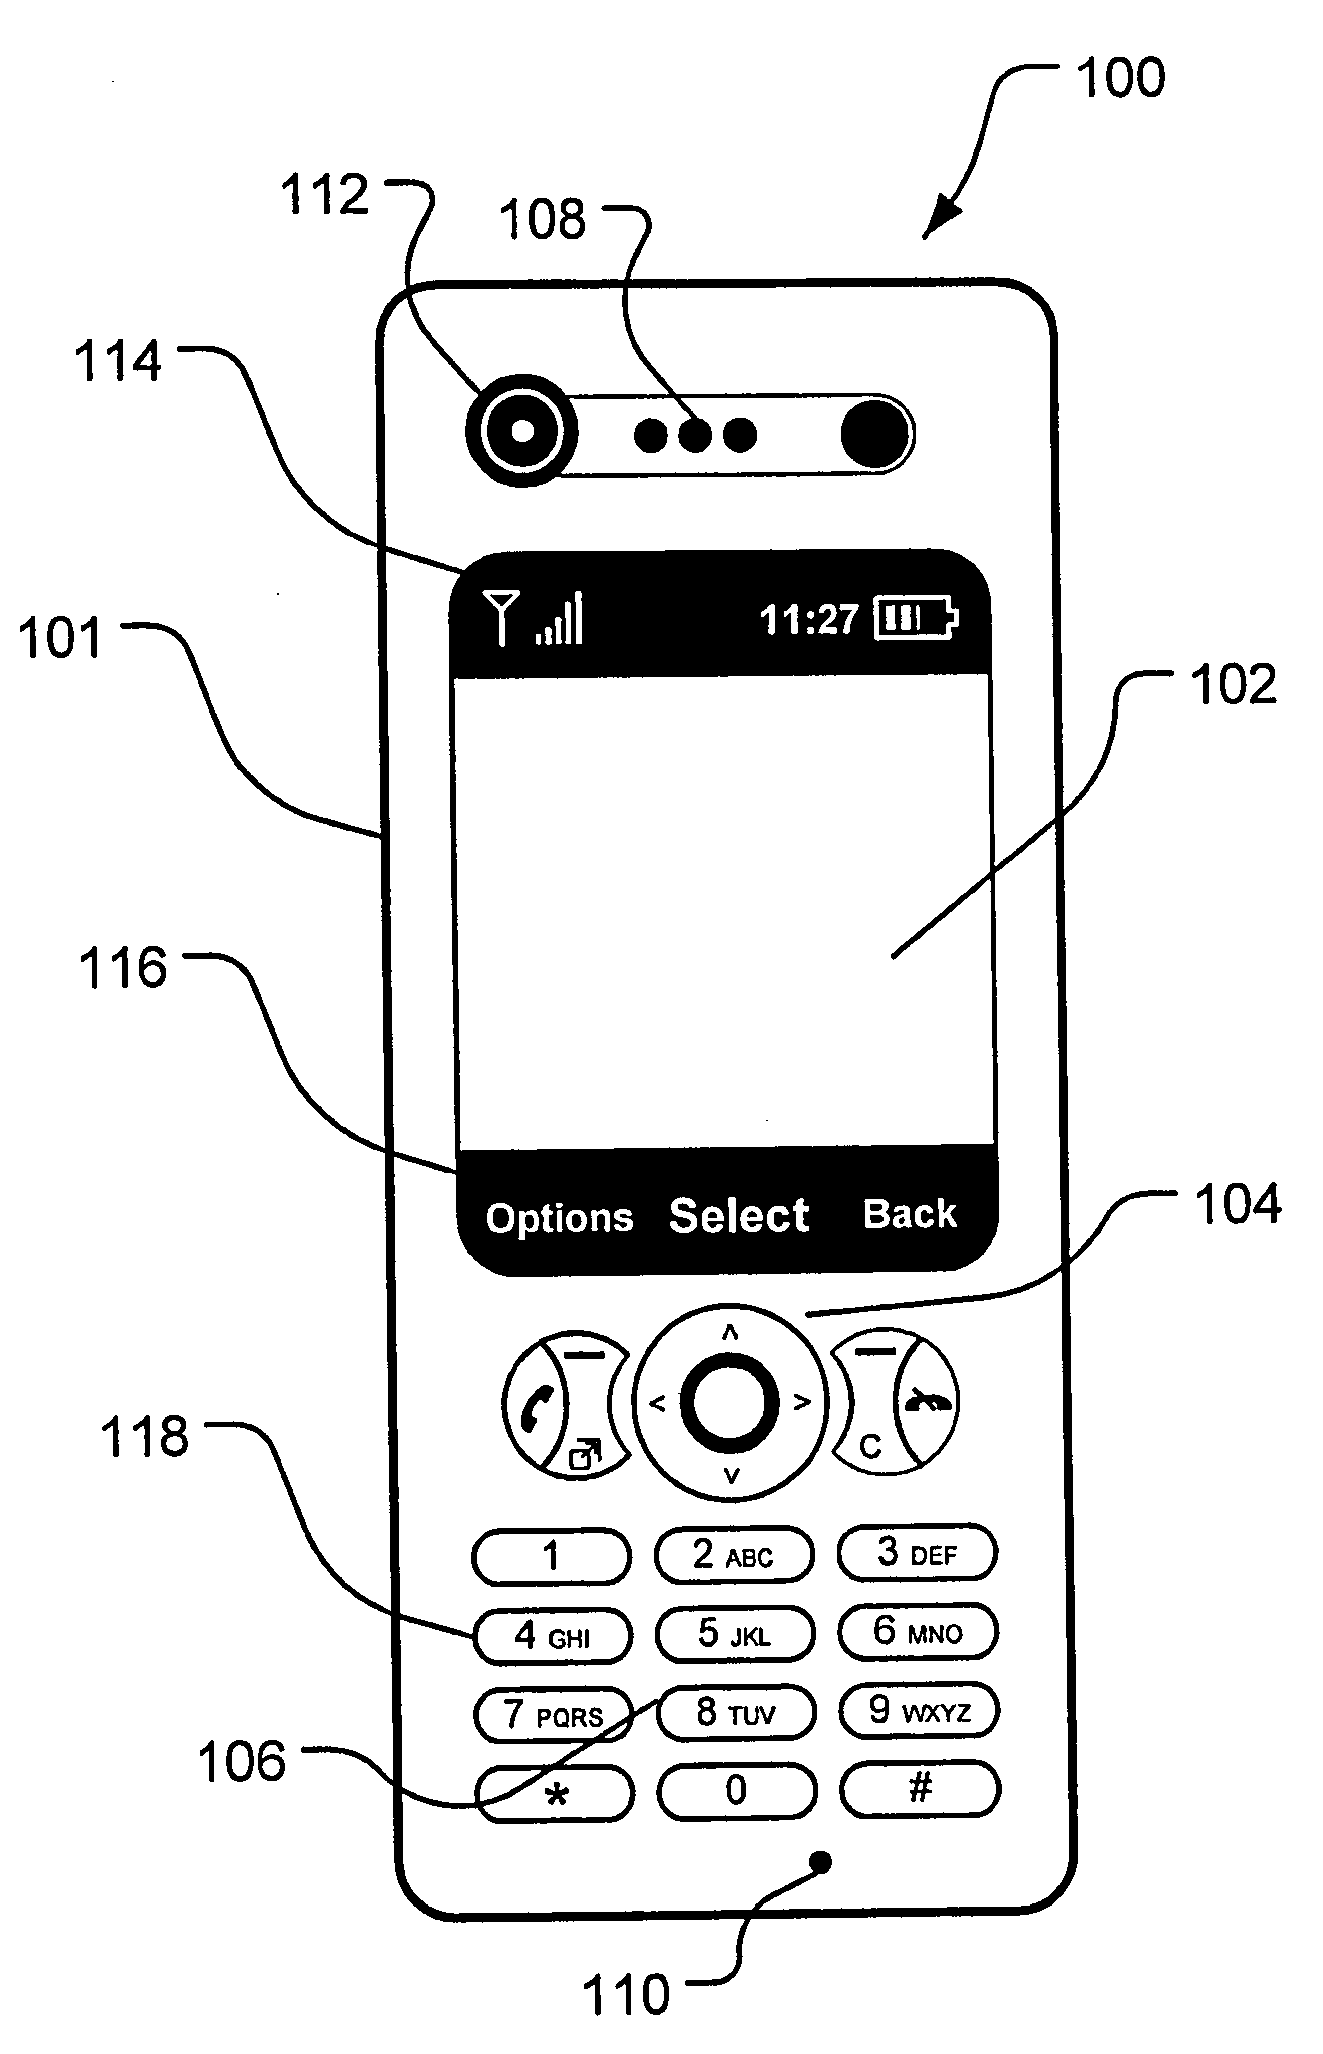 Qwerty-keyboard for mobile communication devices